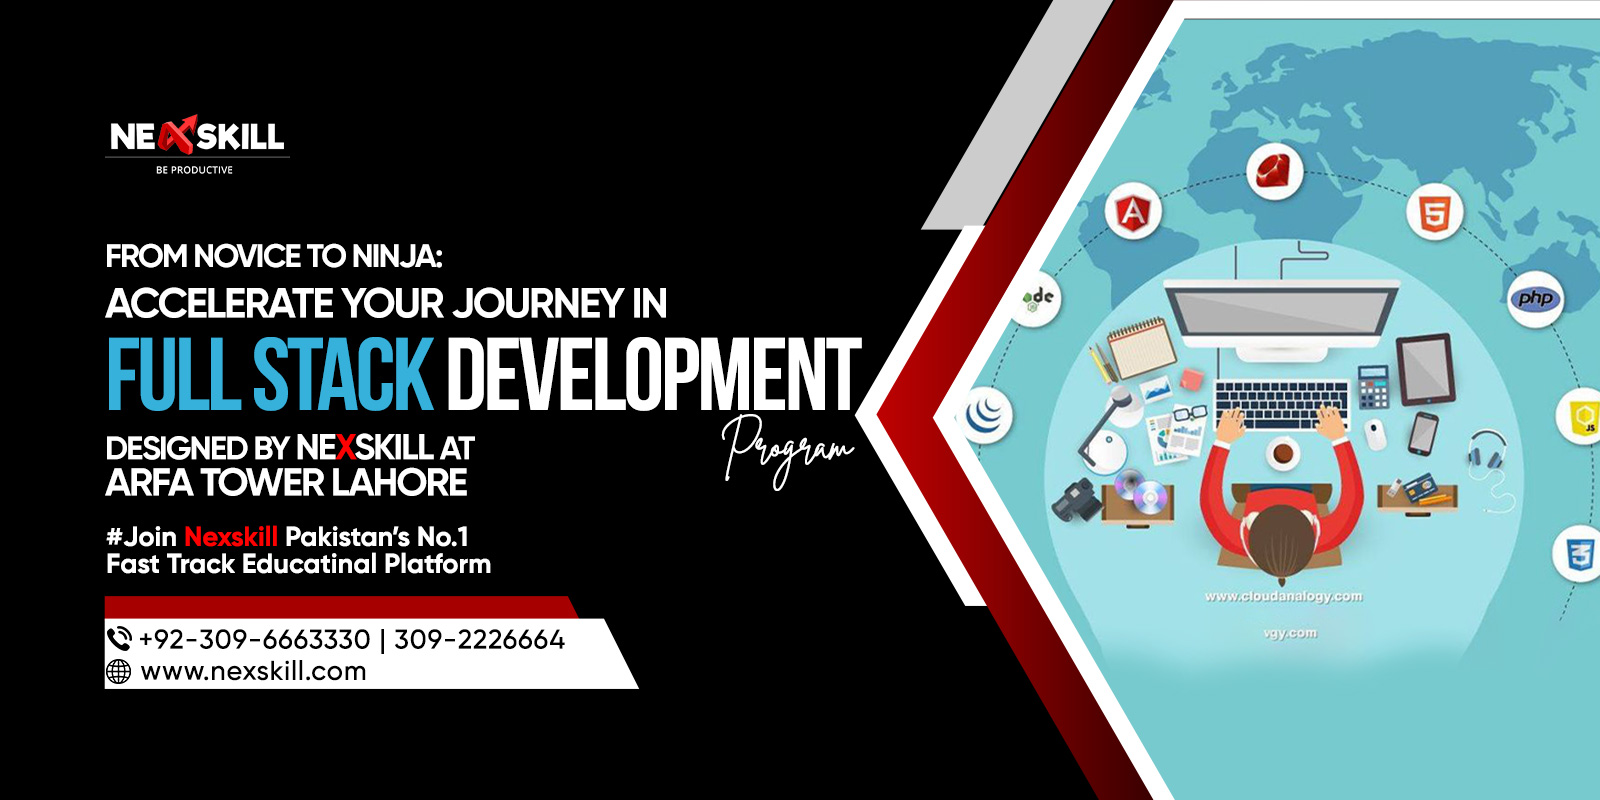 From Novice to Ninja: Accelerate Your Journey in Full Stack Development Program designed by Nexskill at Arfa Tower Lahore